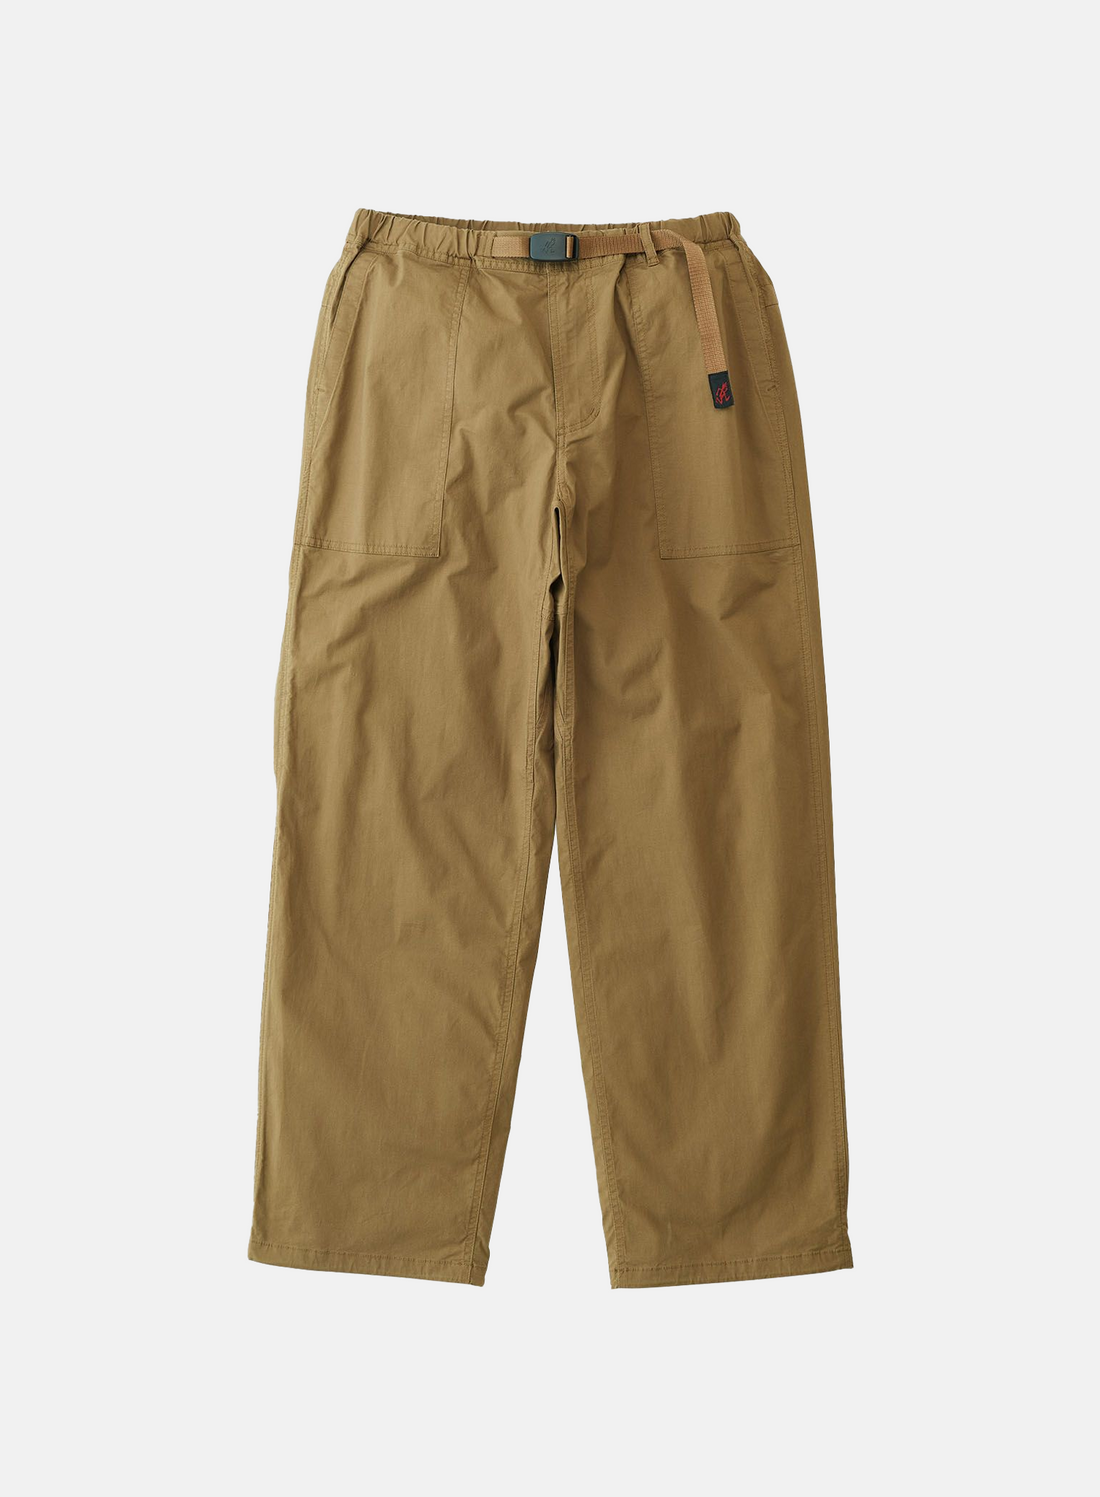 Gramicci Weather Fatigue Pant Coyote - Hympala Store 